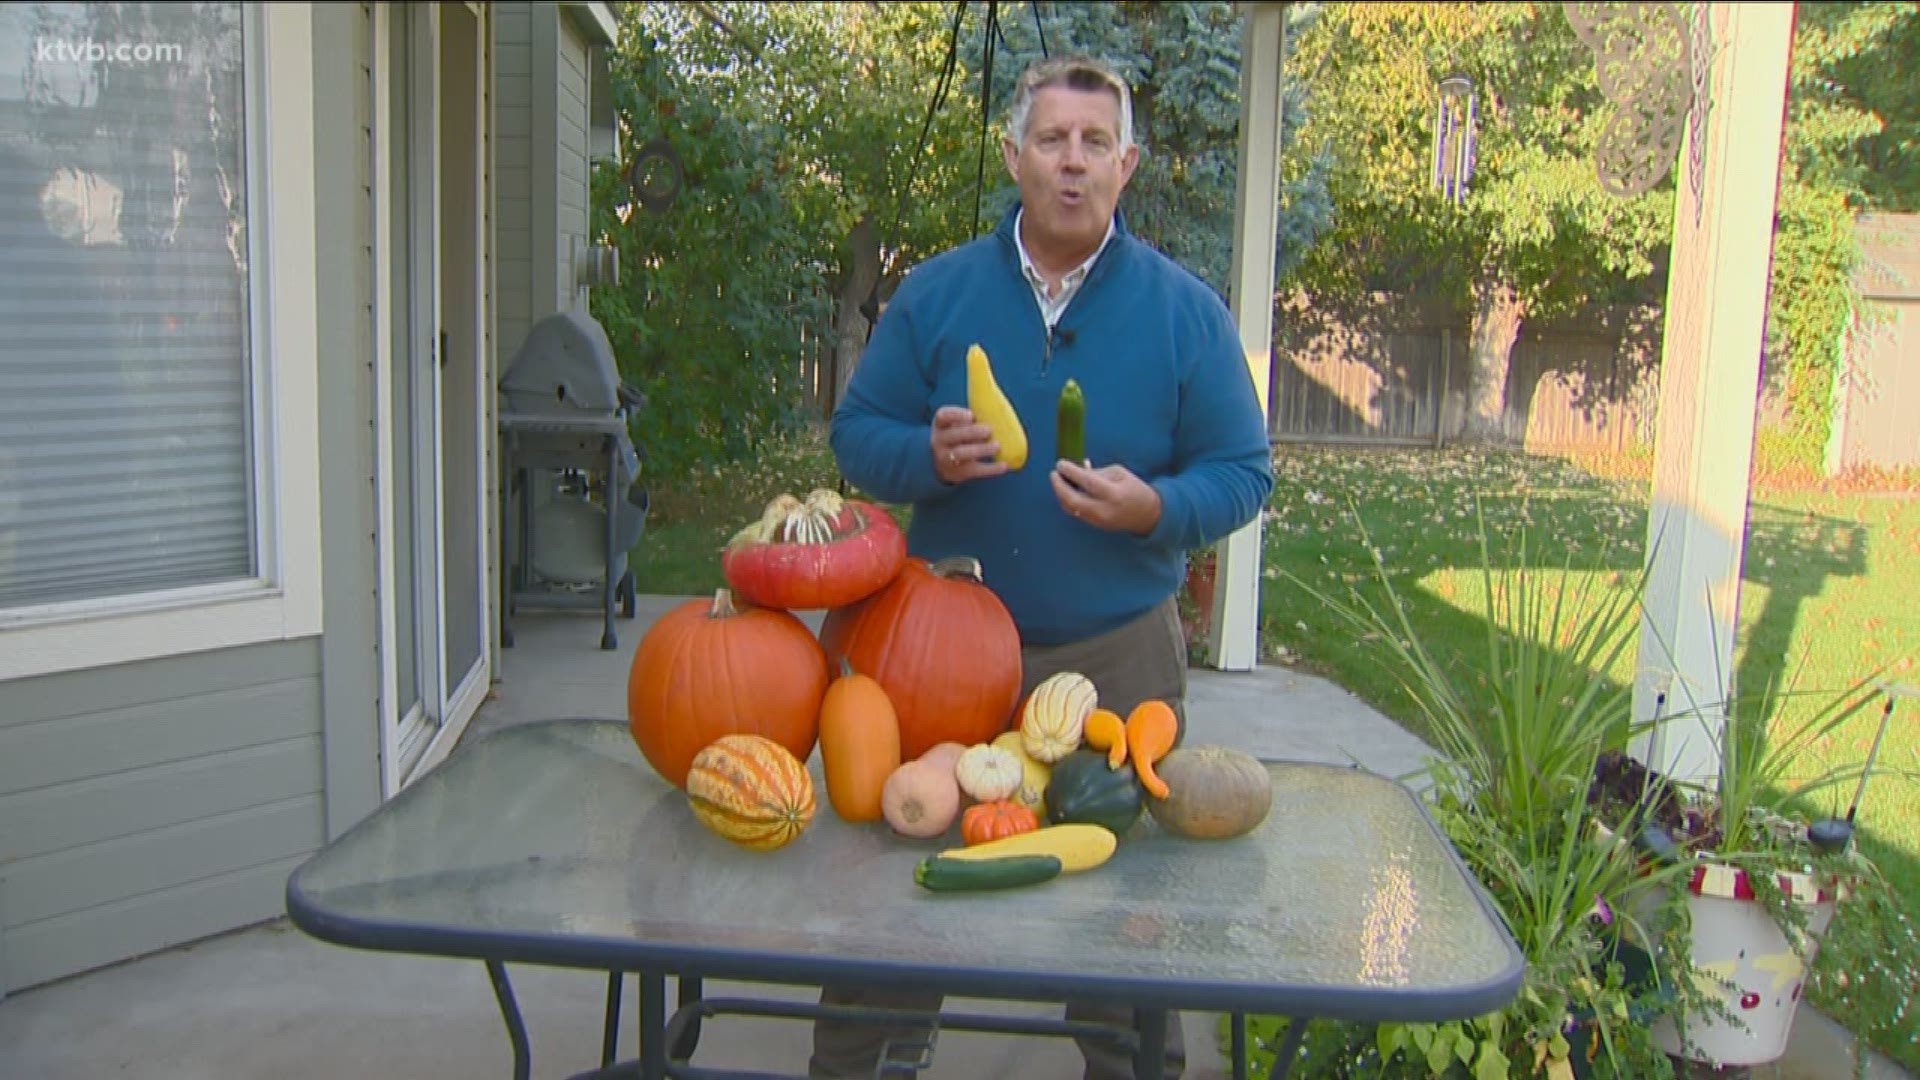 Jim Duthie says there are many varieties of squash you might want to try in your garden next year.